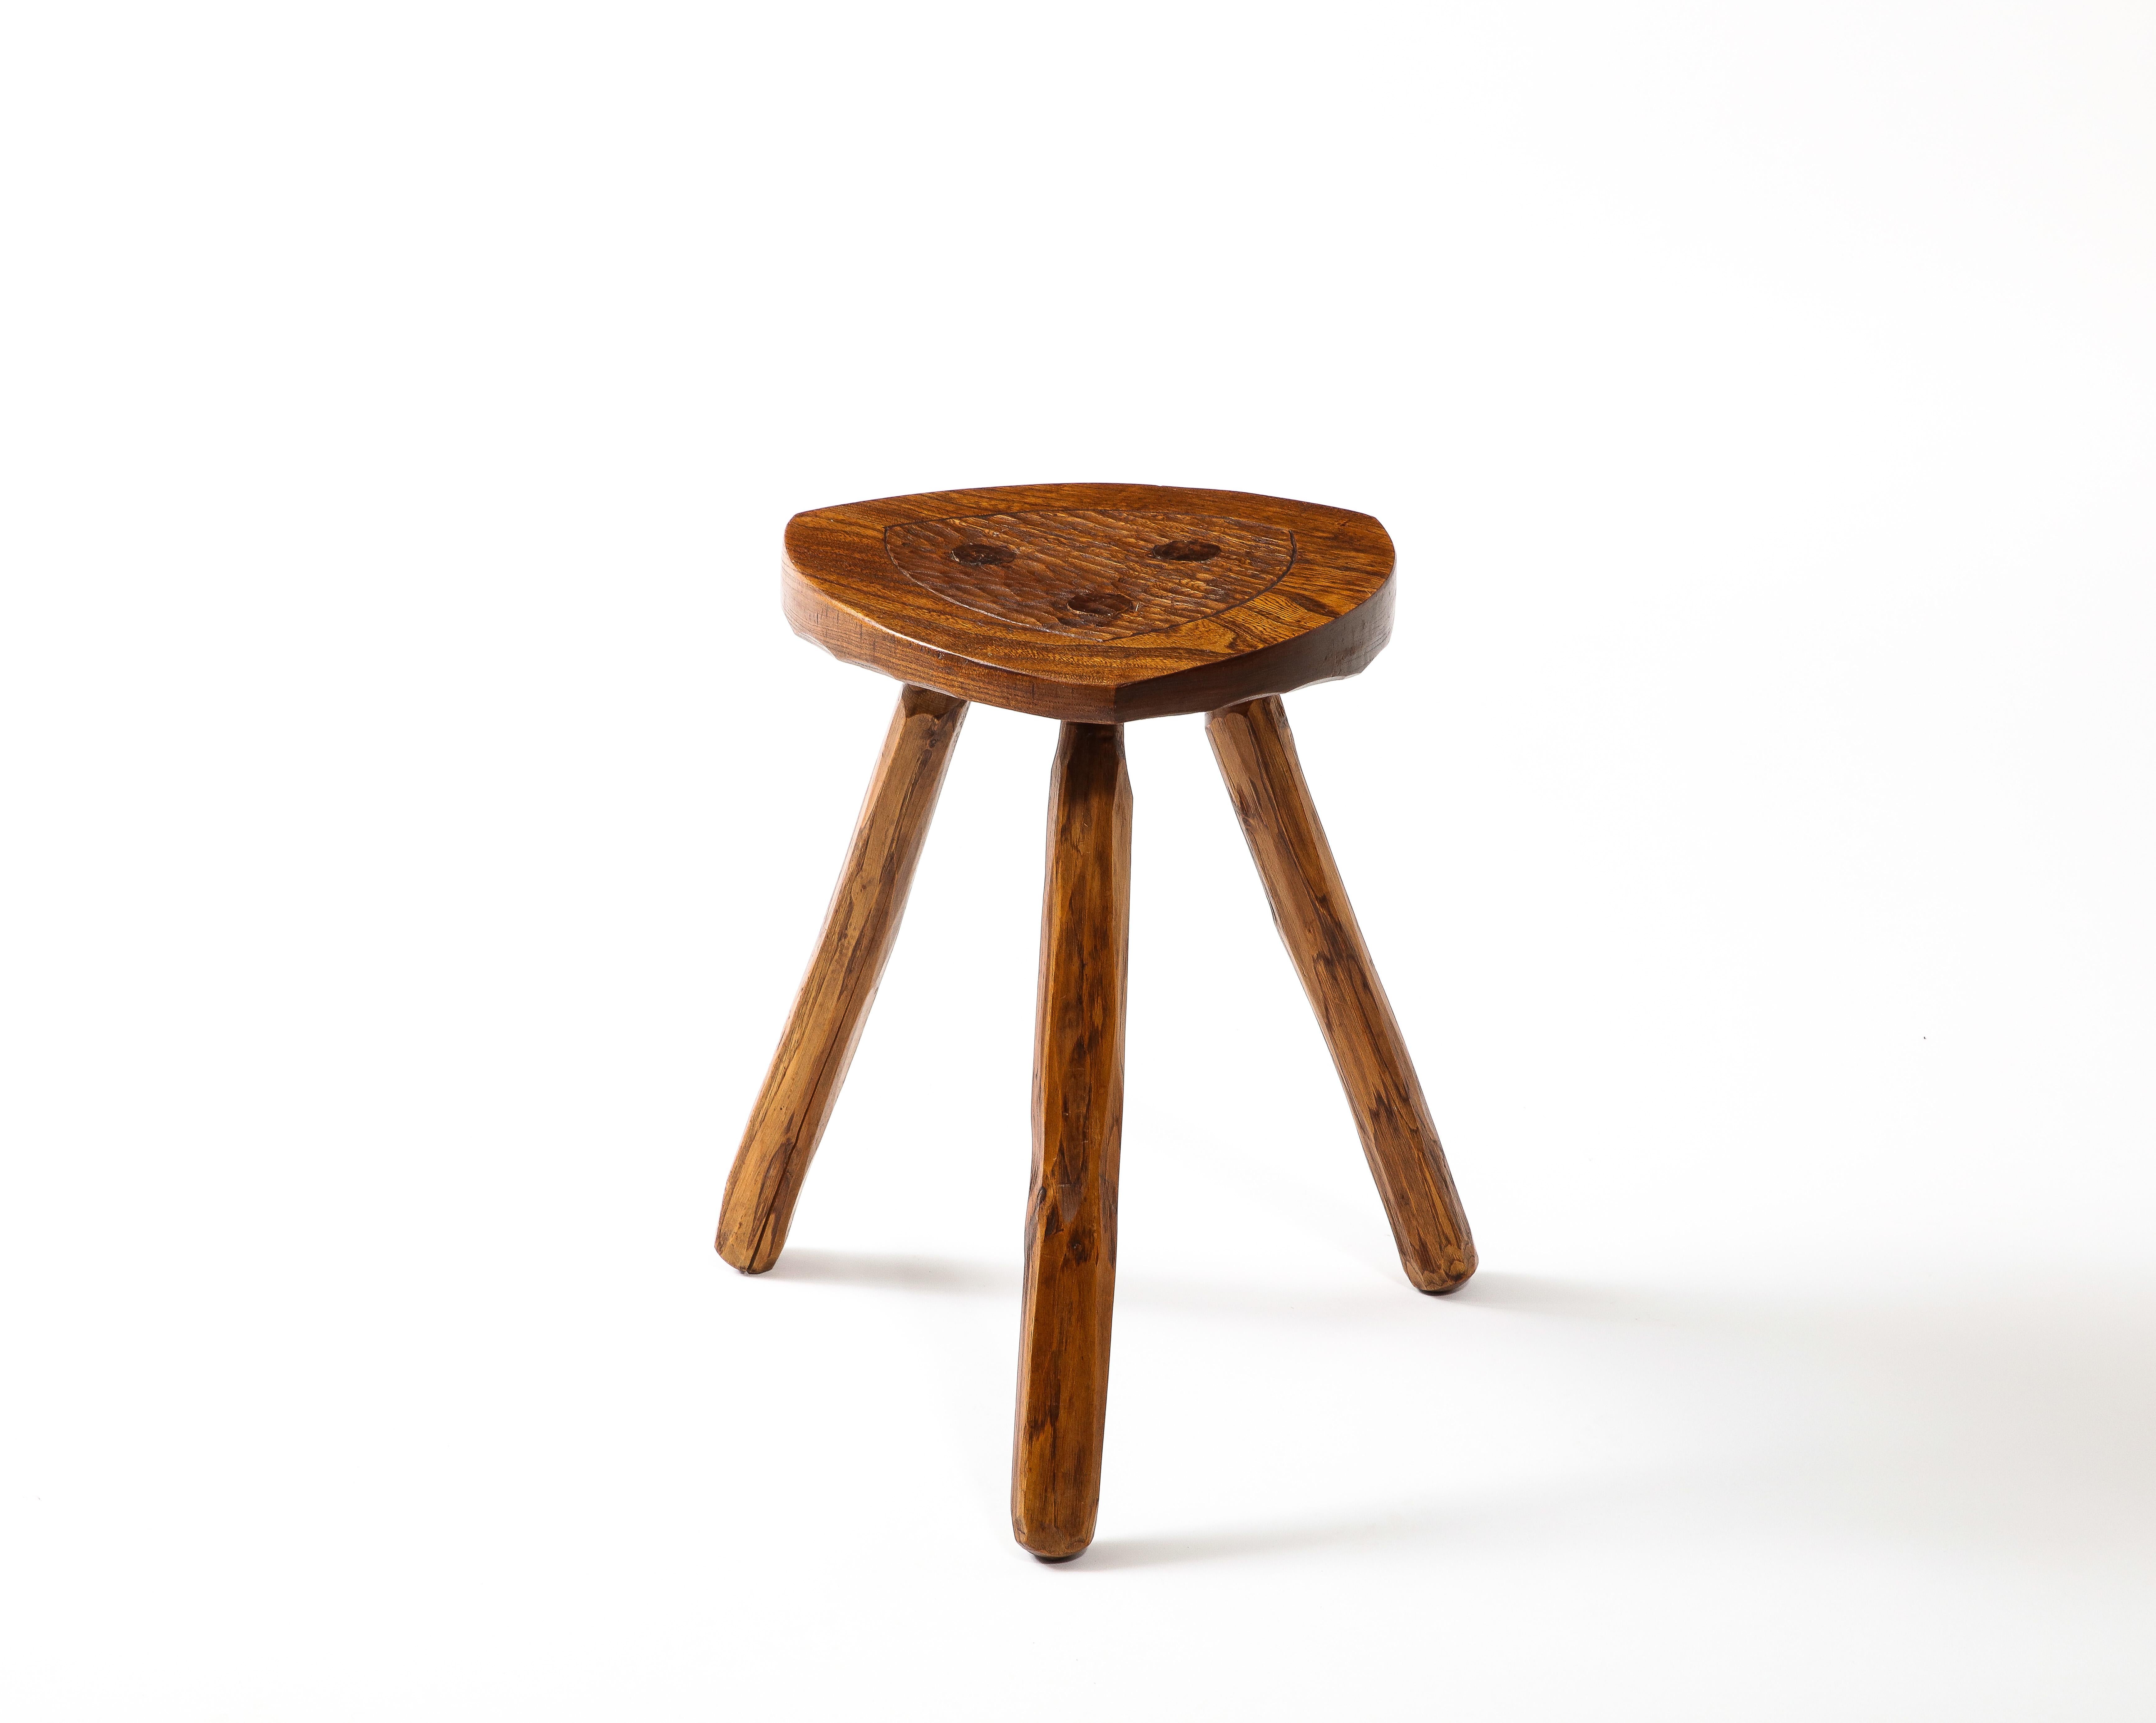 Oak Triangular Stool in the Style of Marolles, France 1950